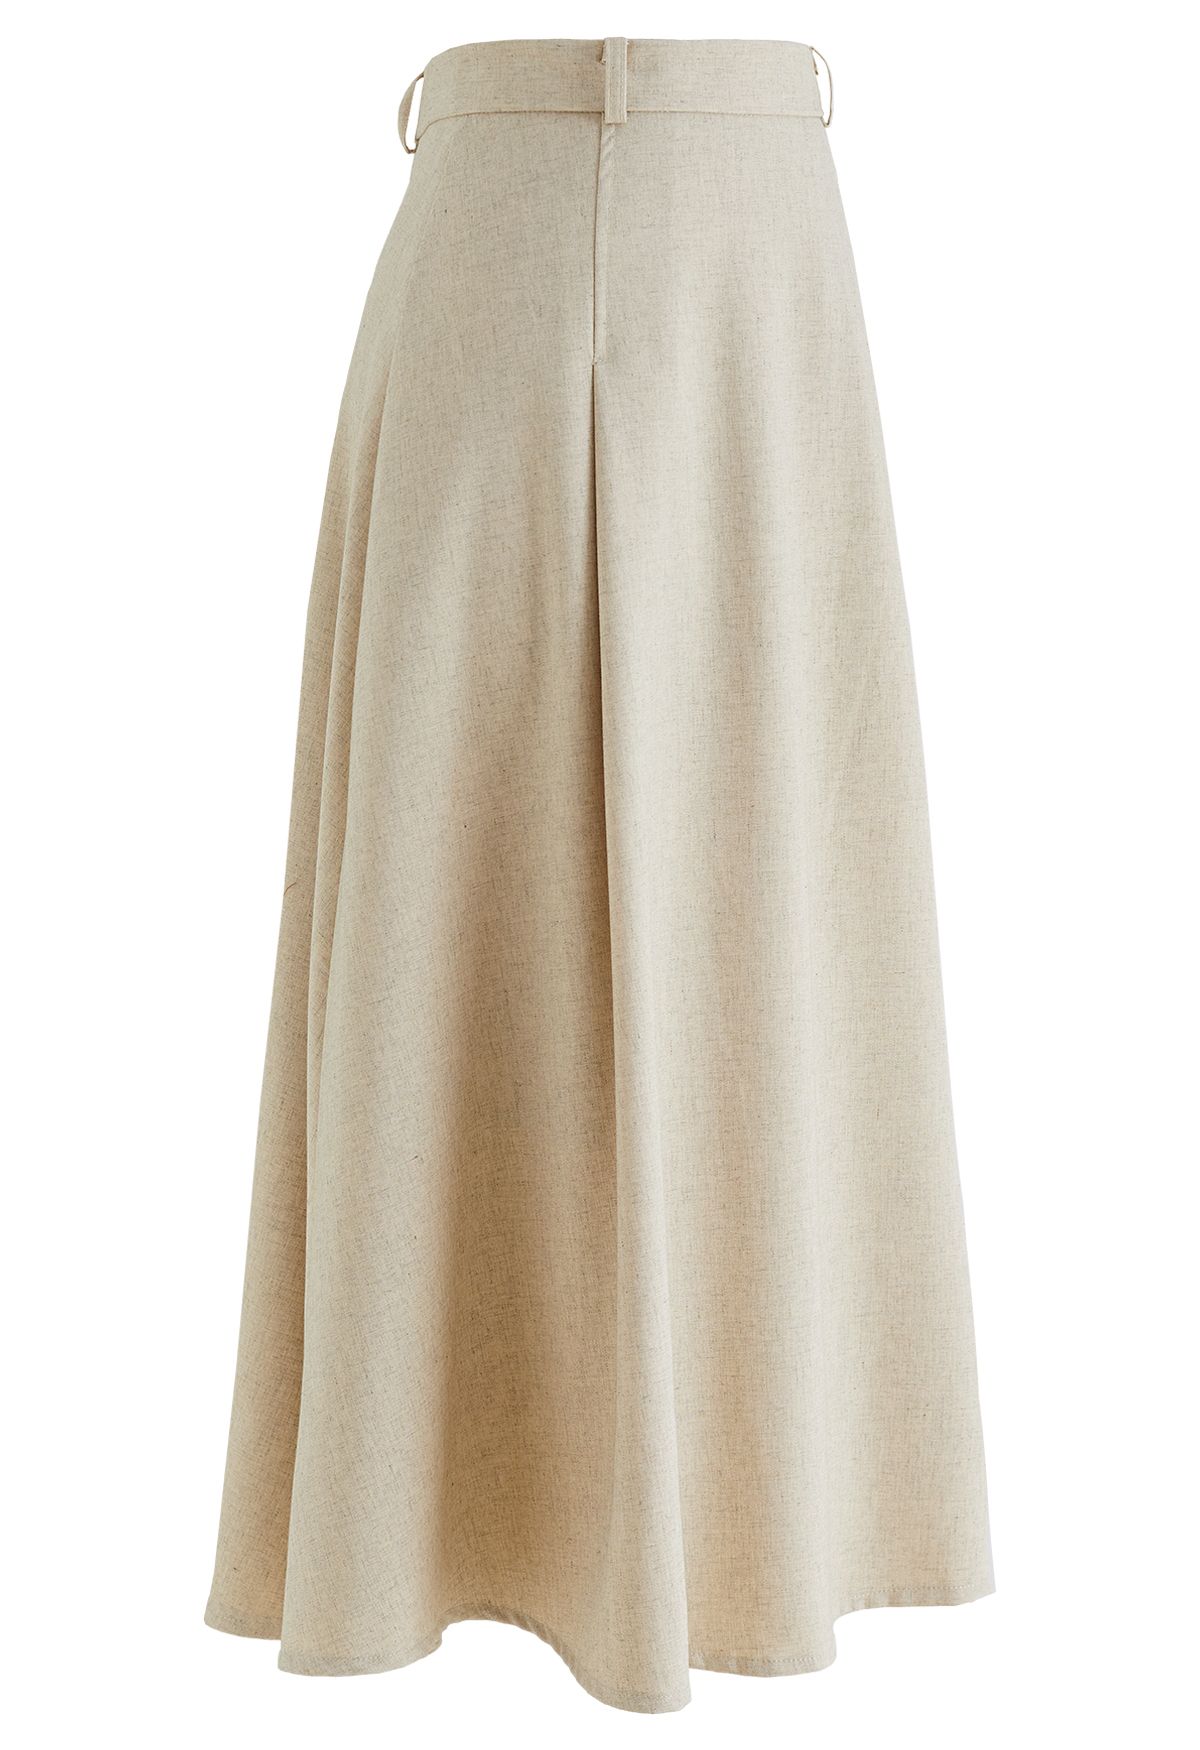 Elementary A-Line Maxi Skirt in Sand